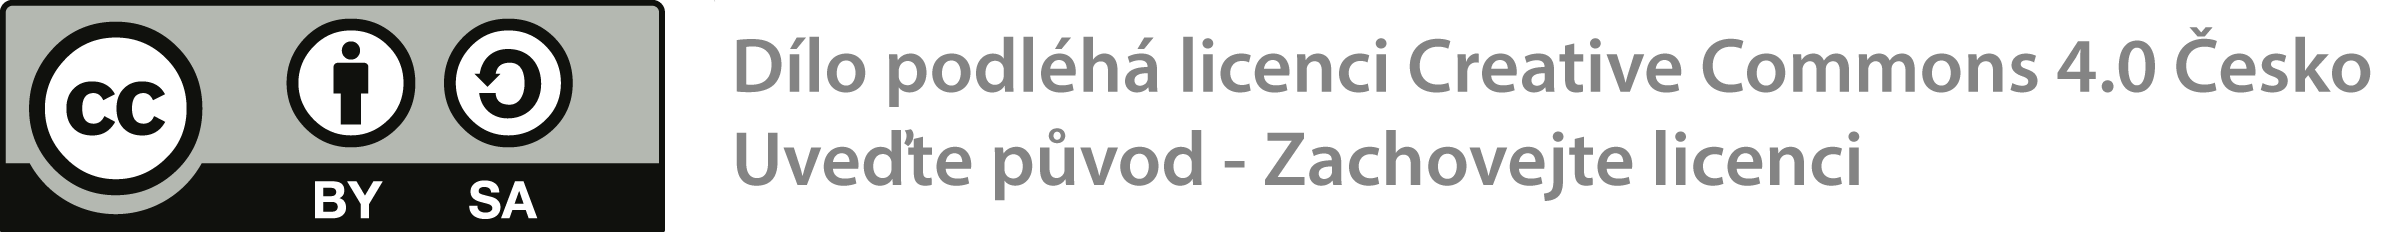 Licence CC BY